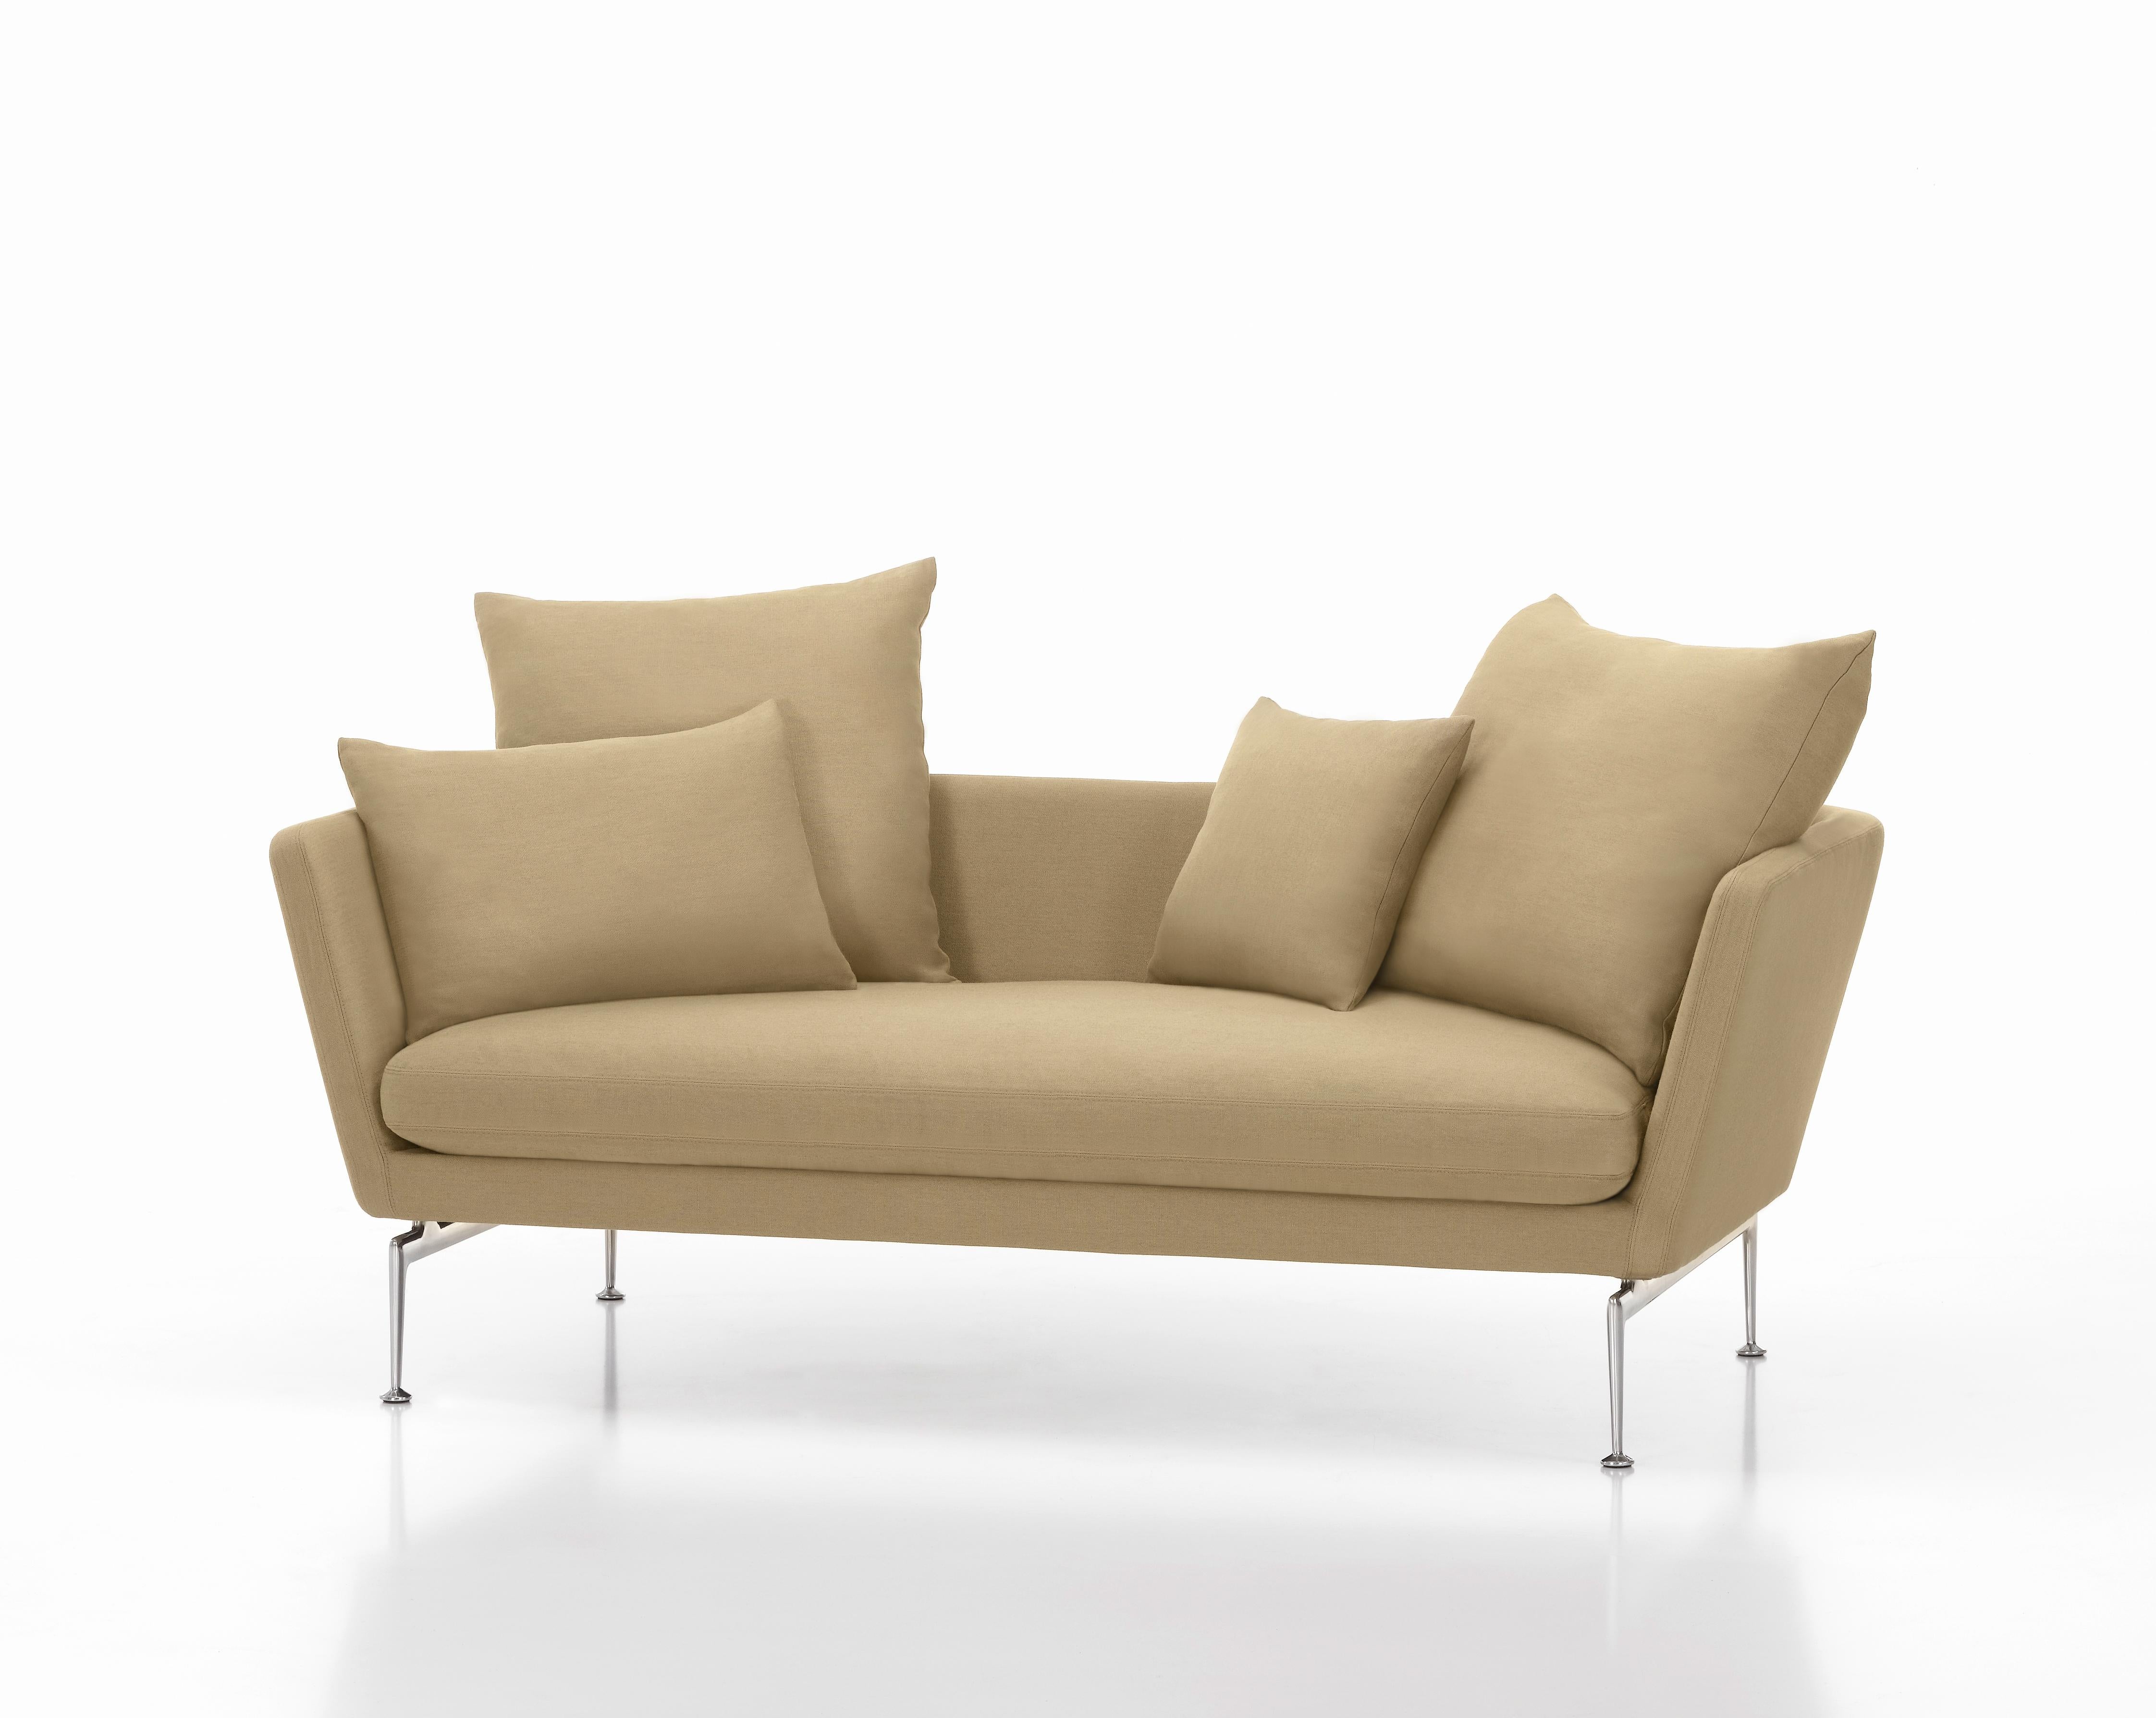 These items are currently only available in the United States.

The Suita sofa system combines light and slender volumes with an Industrial and technological aesthetic. The geometrically precise body and cushions seem to float above the sleek,